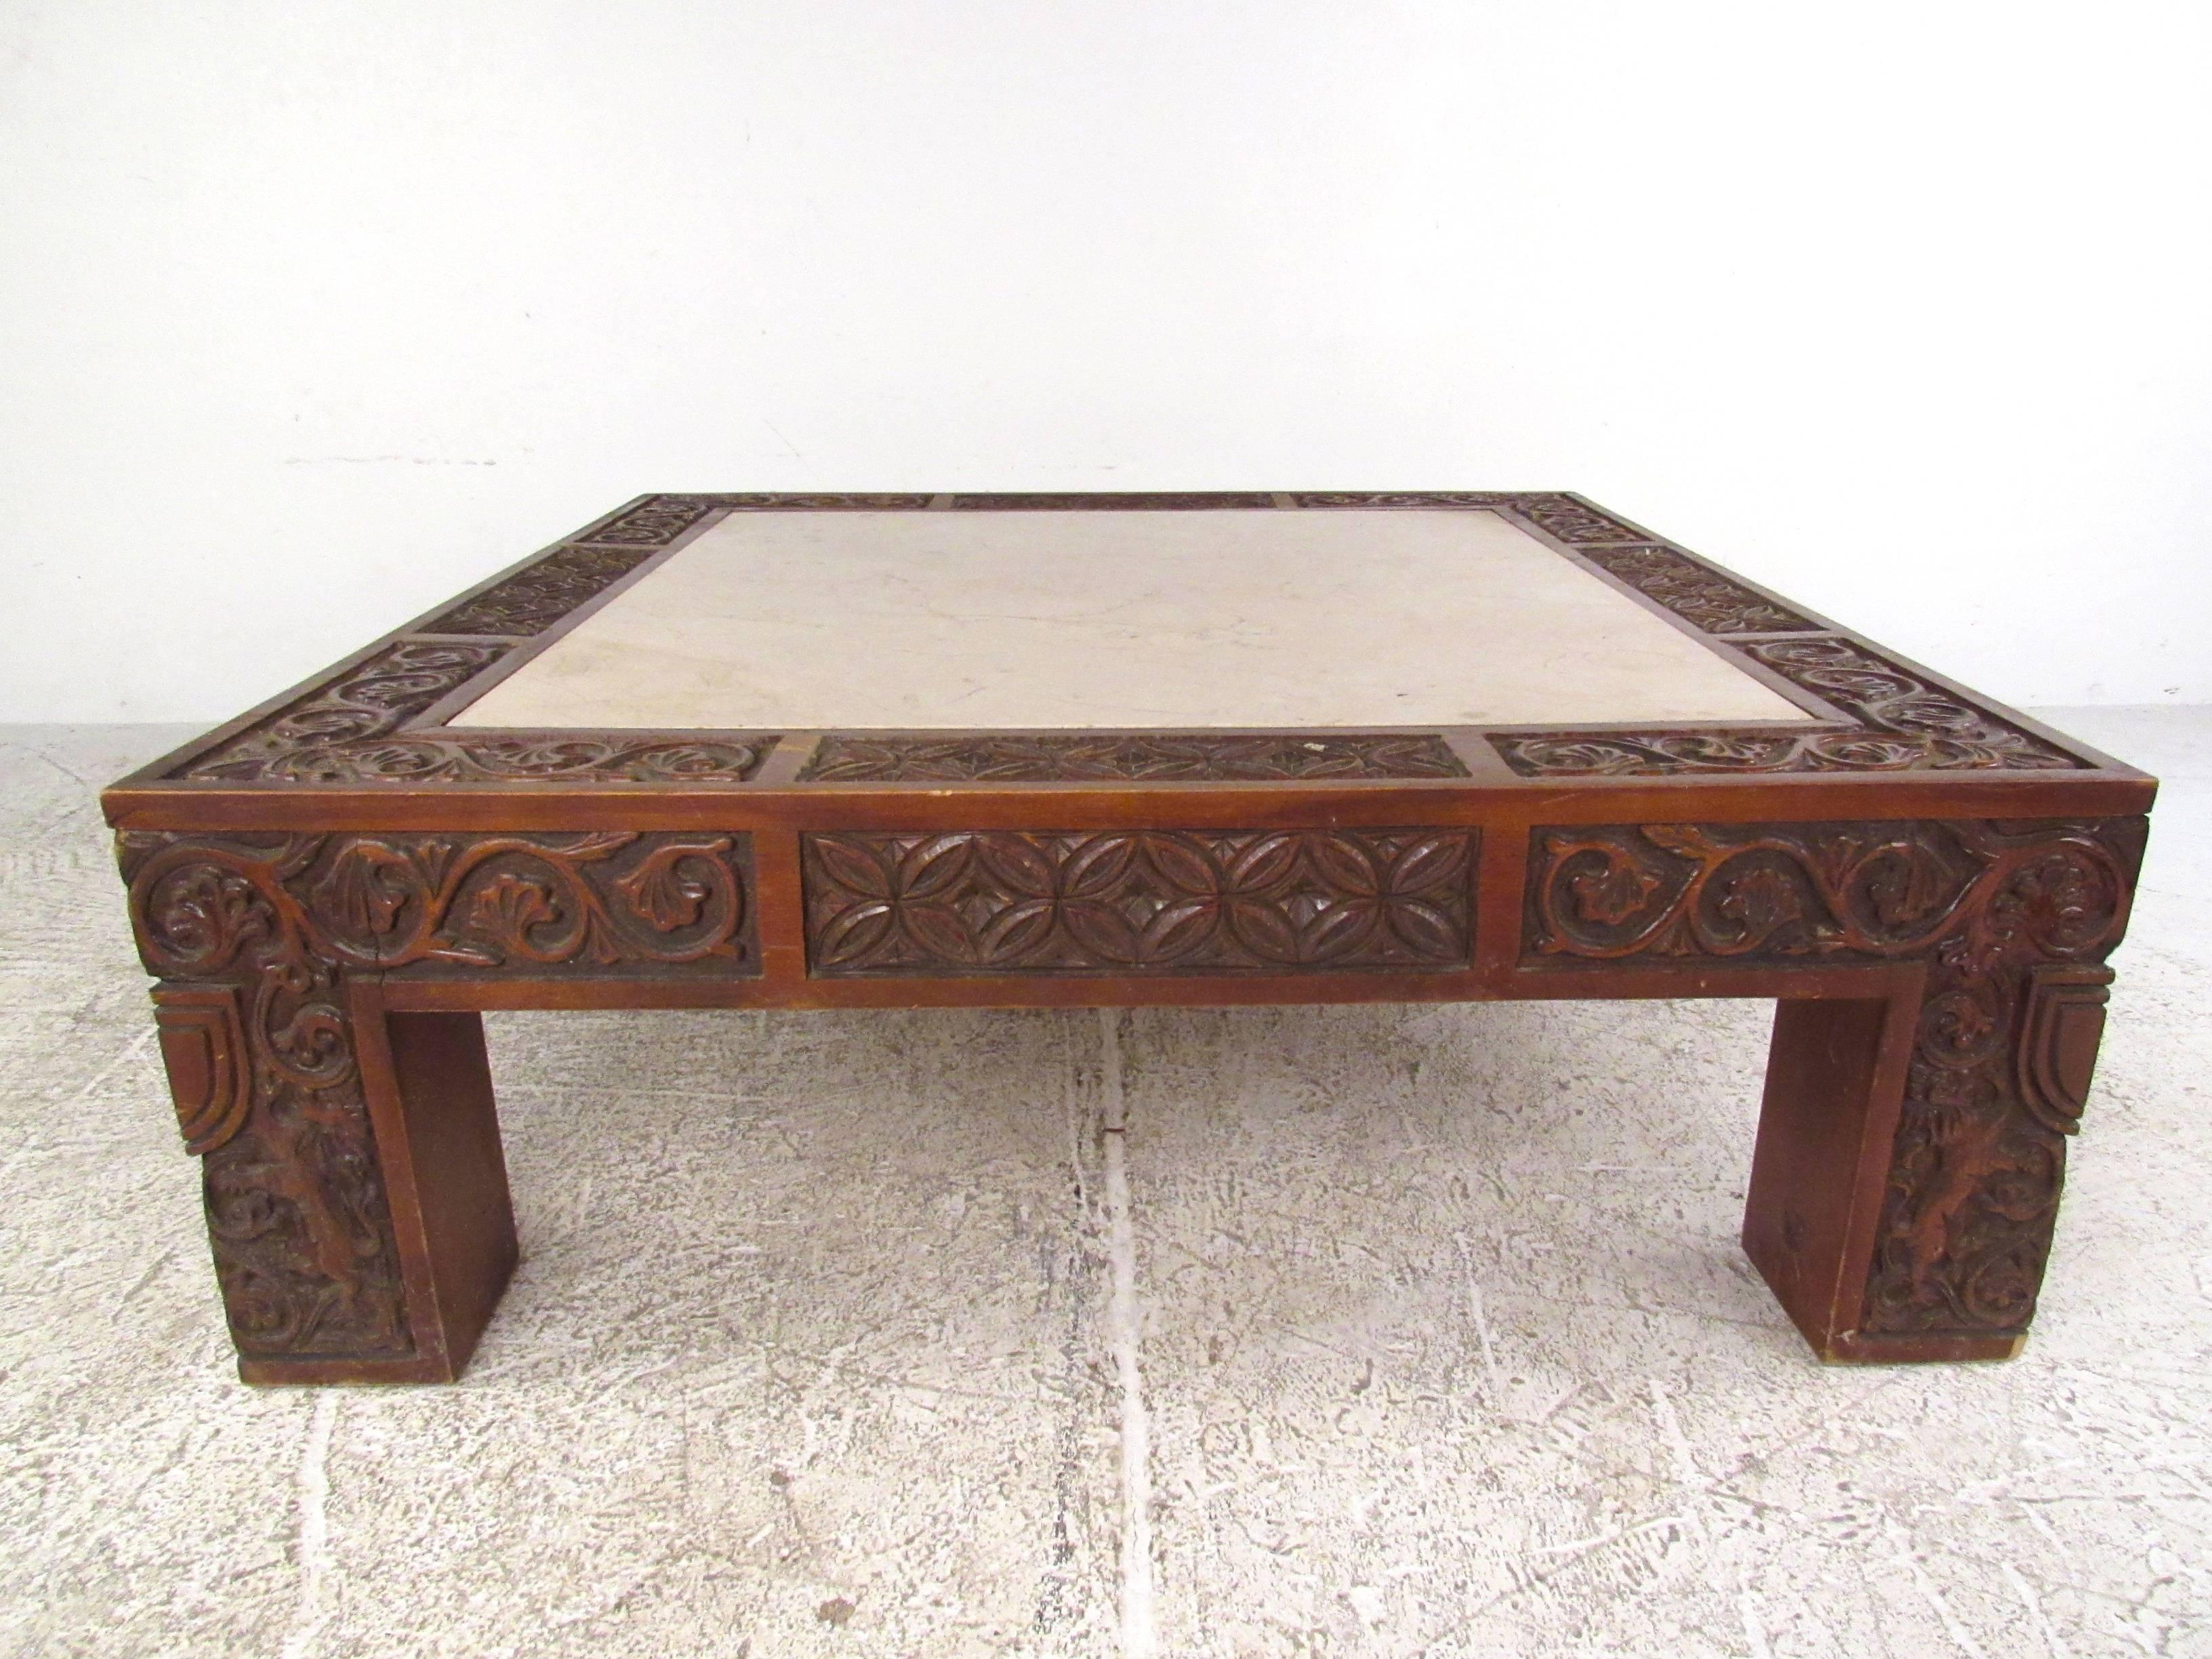 This unique vintage table features an ornate carved frame with an inset marble top. Unique decorative style makes this Mid-Century Modern coffee table an impressive addition to any home. Please confirm item location (NY or NJ).